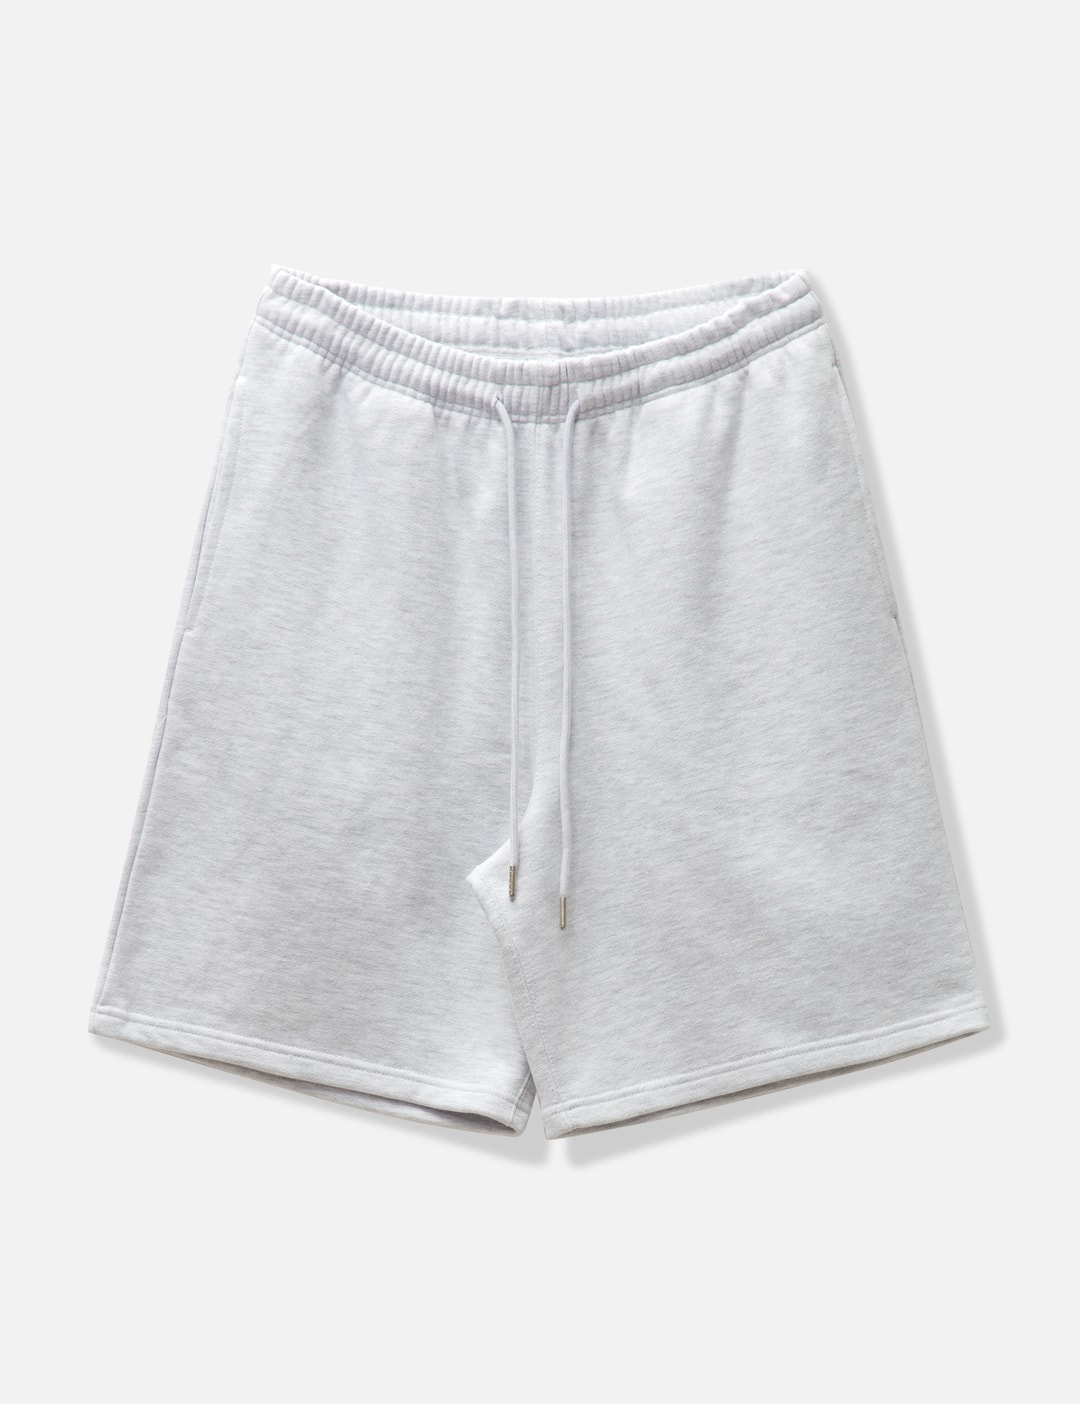 HYPEBEAST GOODS AND SERVICES - LOUNGE SHORTS | HBX - Globally Curated ...